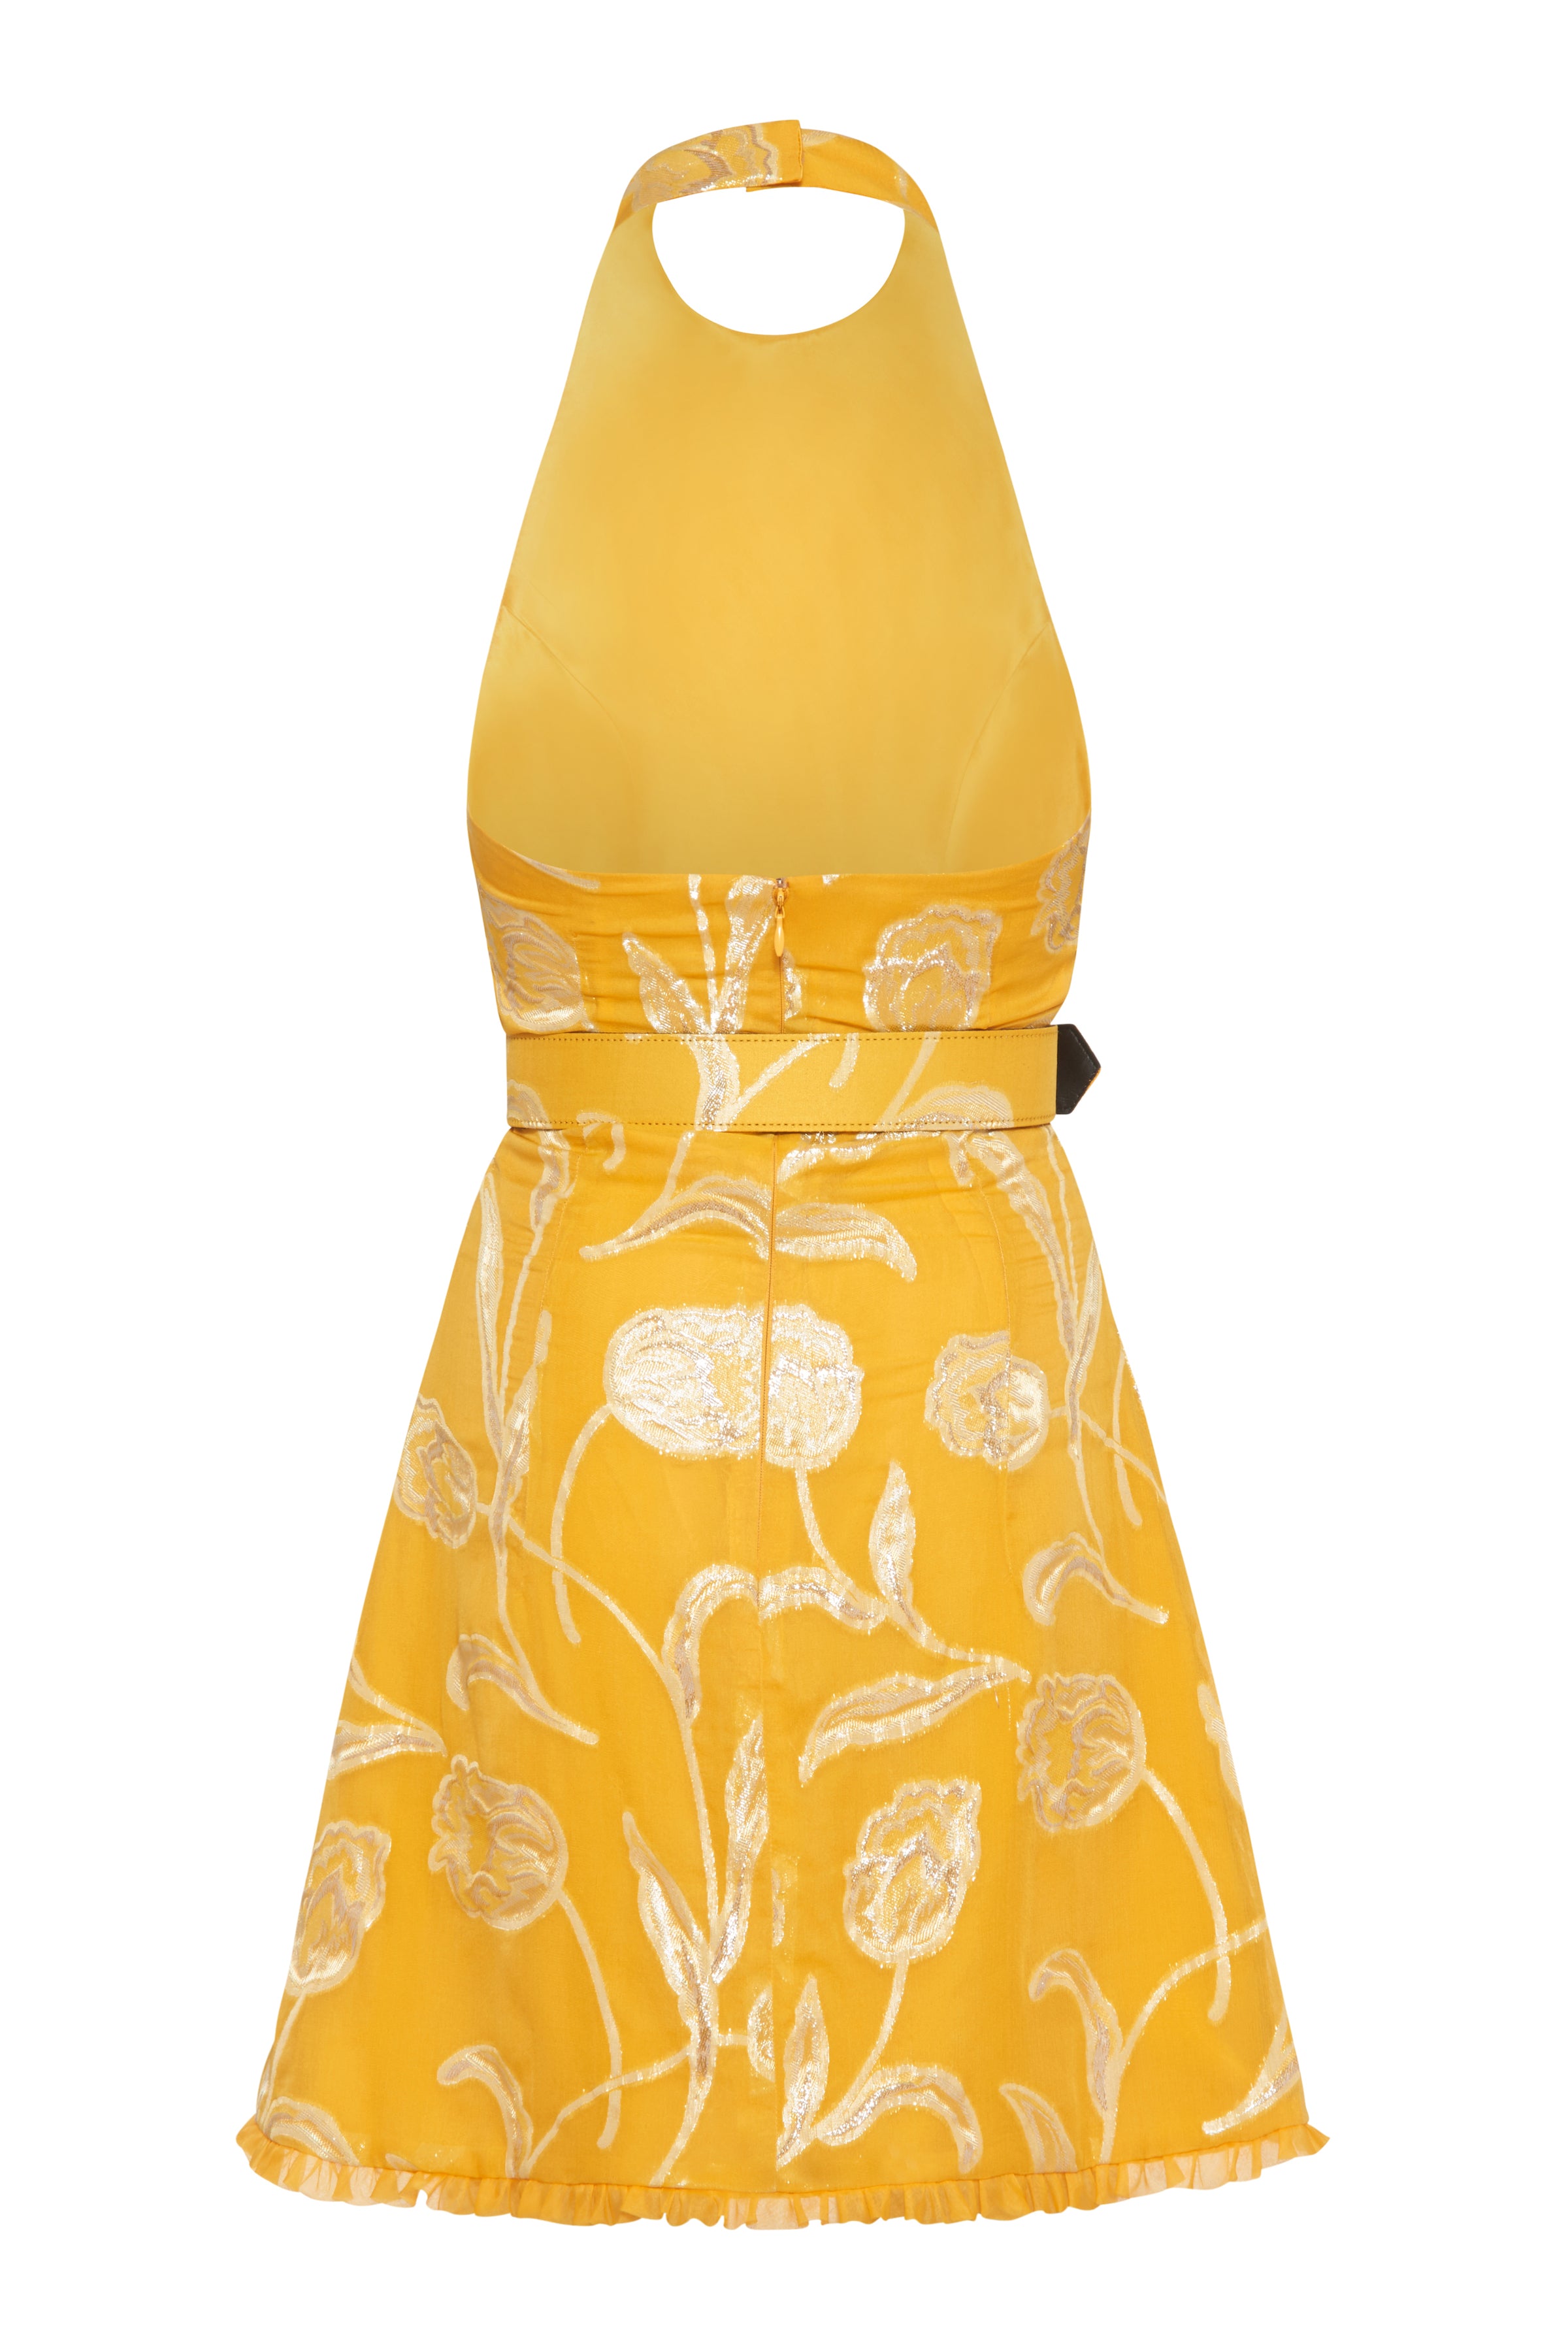 Agave Yellow Floral Halter Mini Dress With Belt